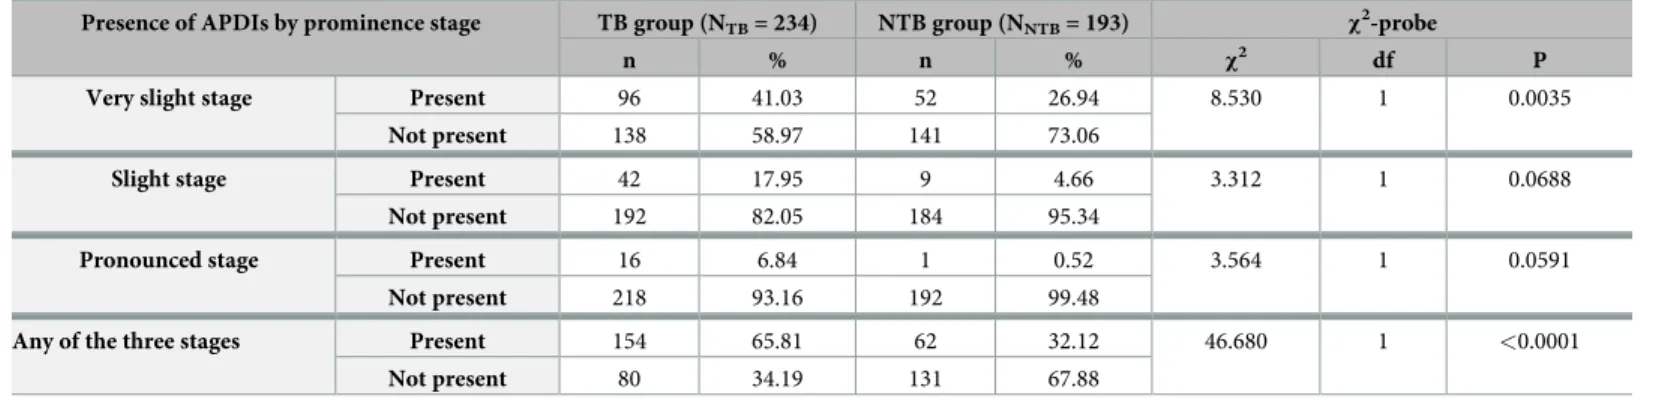 Table 3. Summary of the statistical results, considering the different stages of the prominence of APDIs.